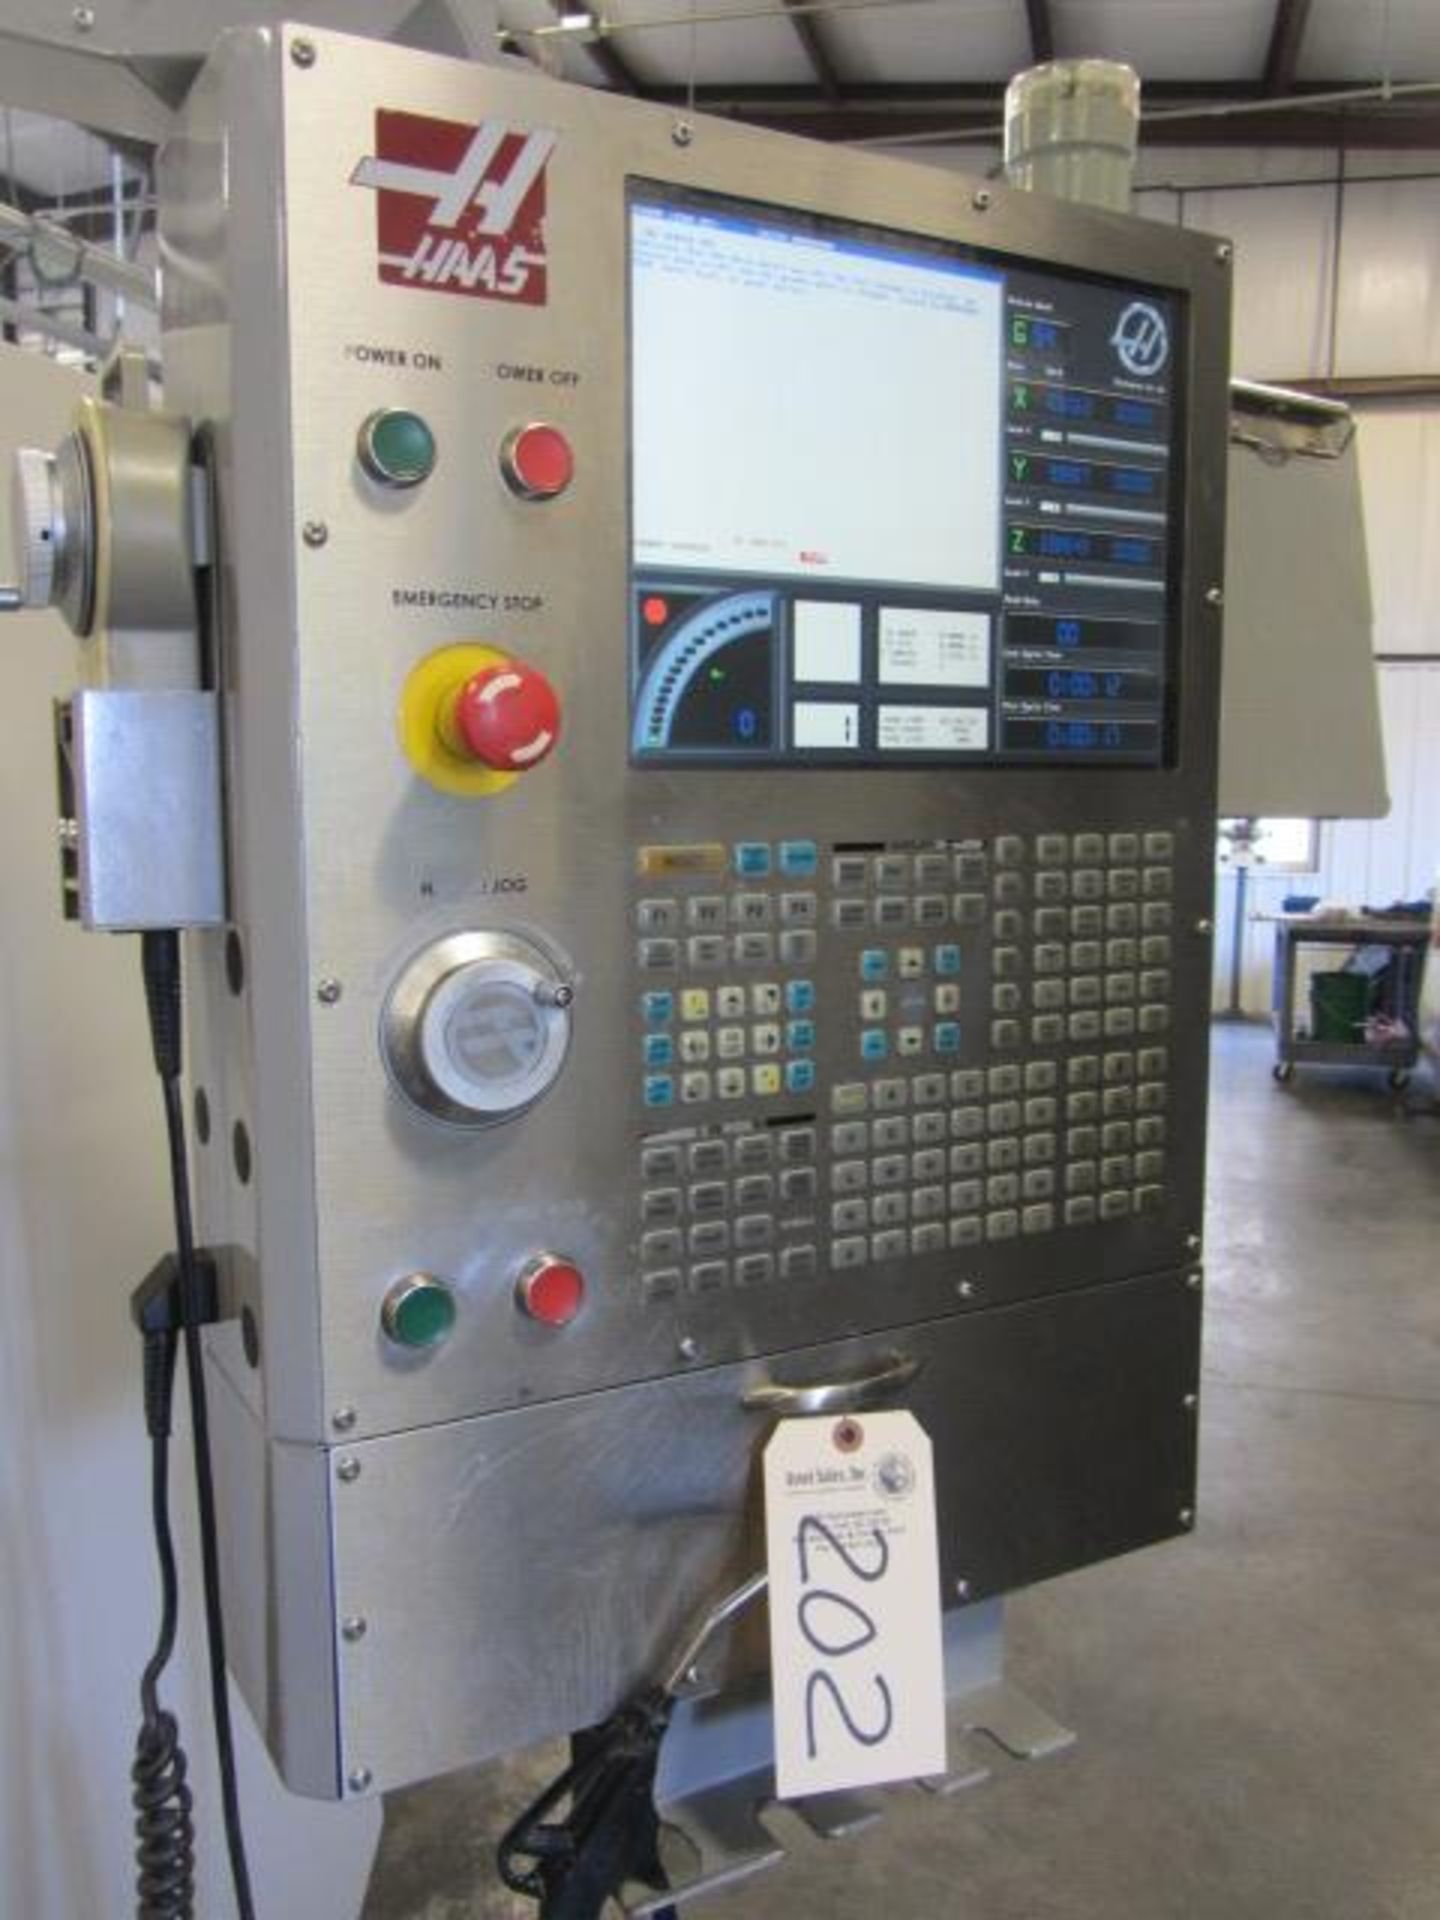 Haas VF3DAPC 4-Axis CNC Vertical Machining Center with Dual Pallet Changer, Intuitive Probing, - Image 3 of 10